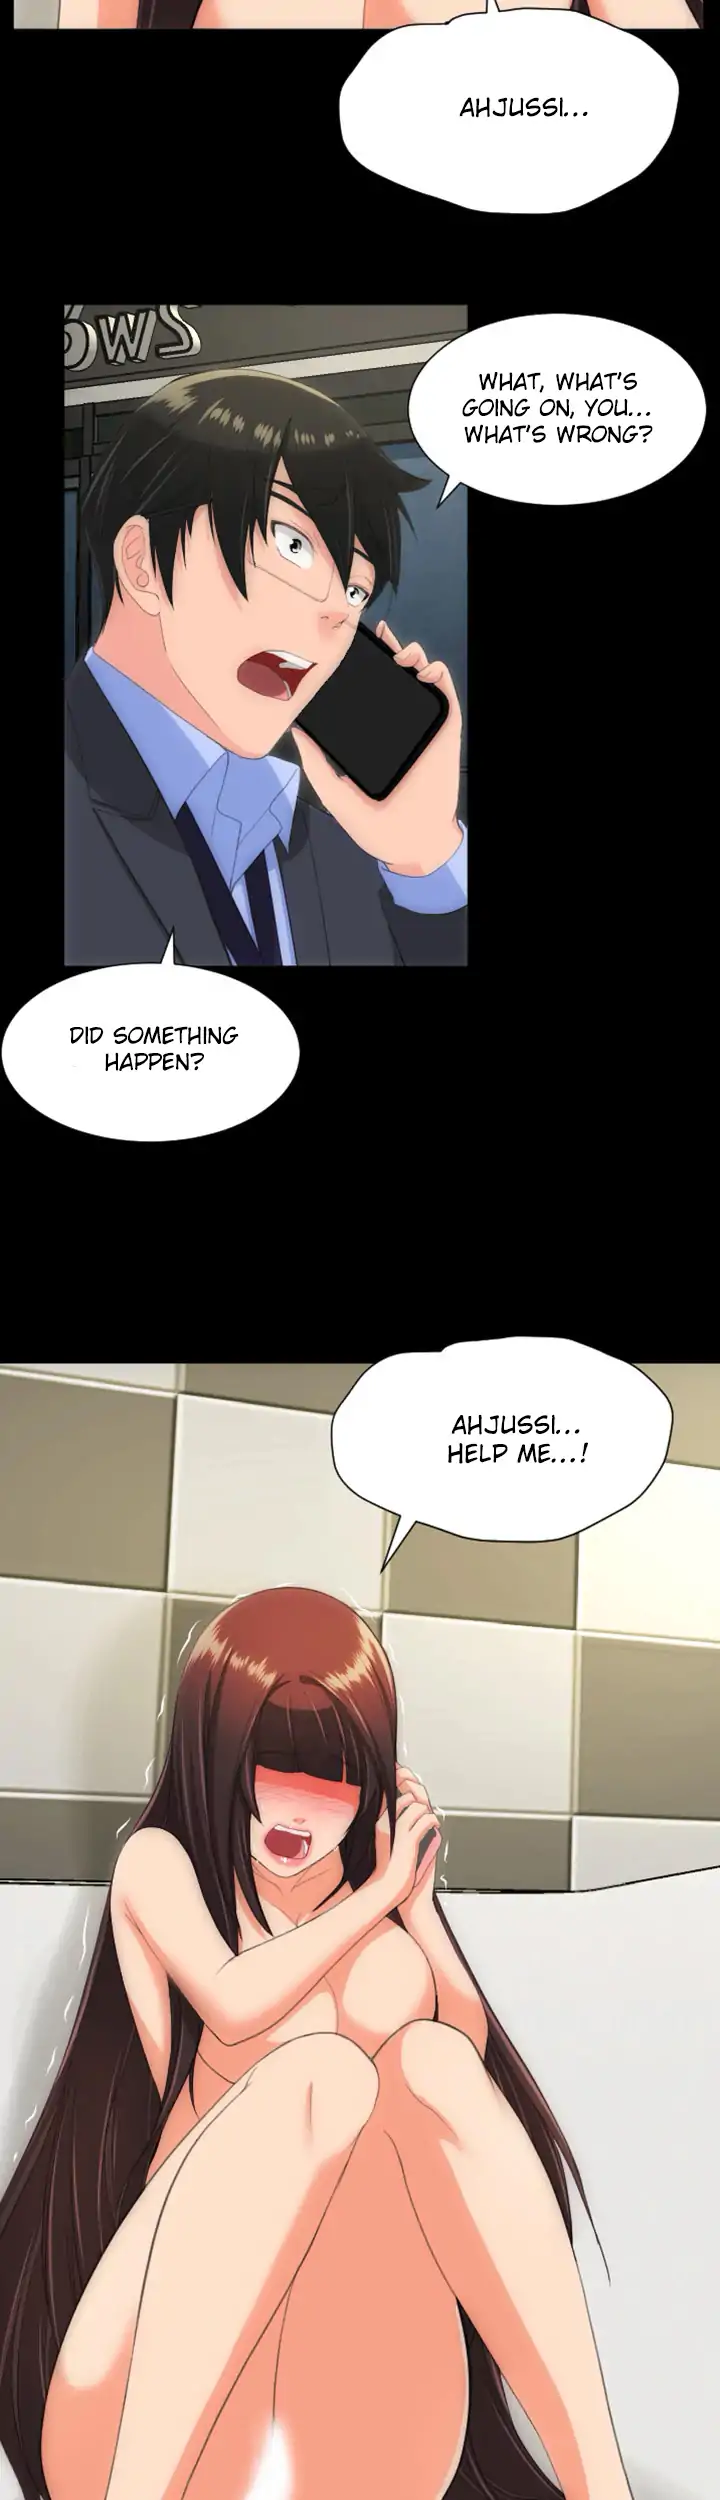 An Adult’s Experiences - Chapter 29 Page 3